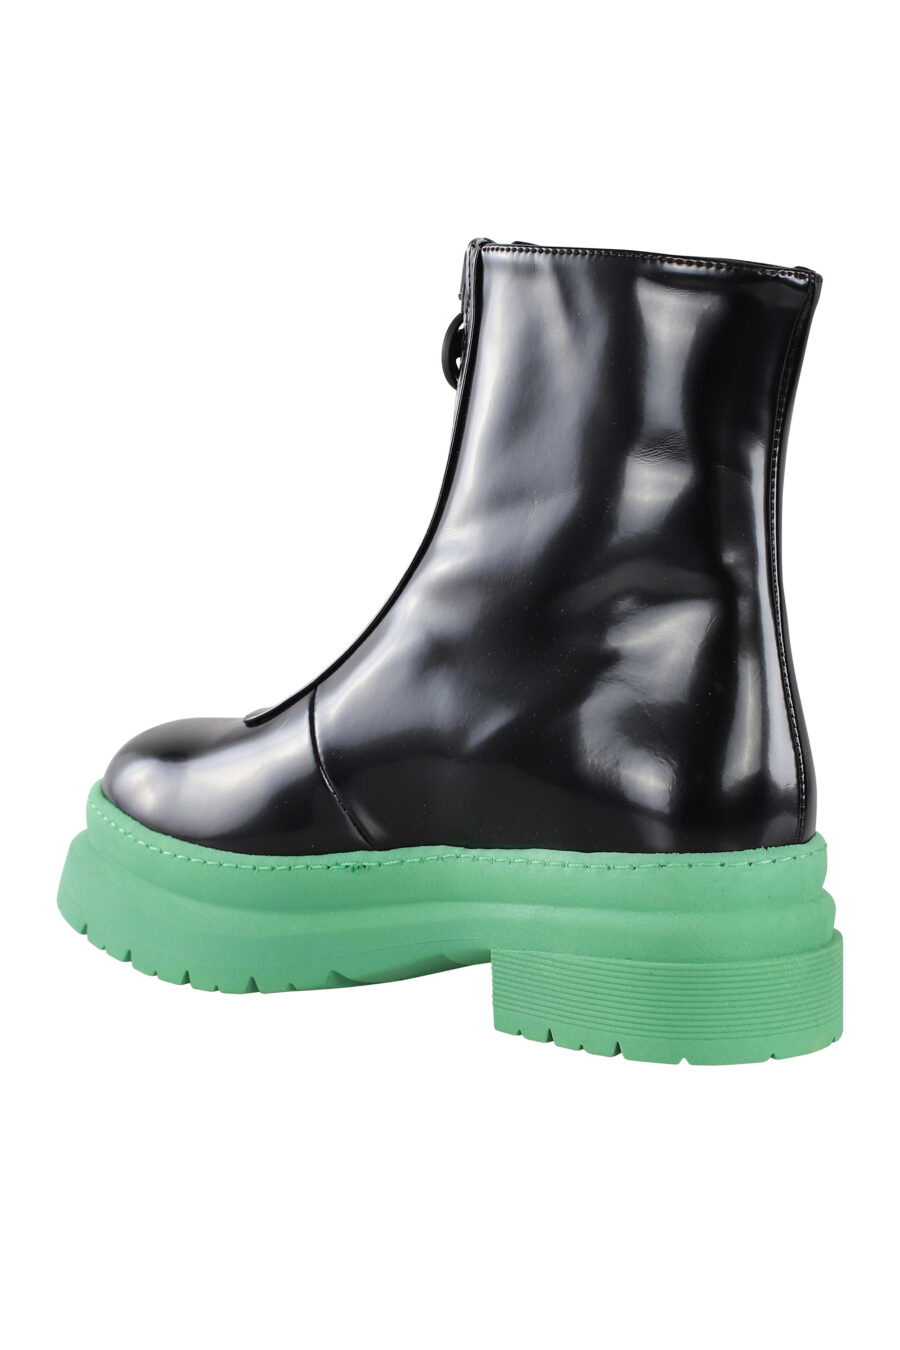 Black vegan leather ankle boots with green sole - IMG 6873